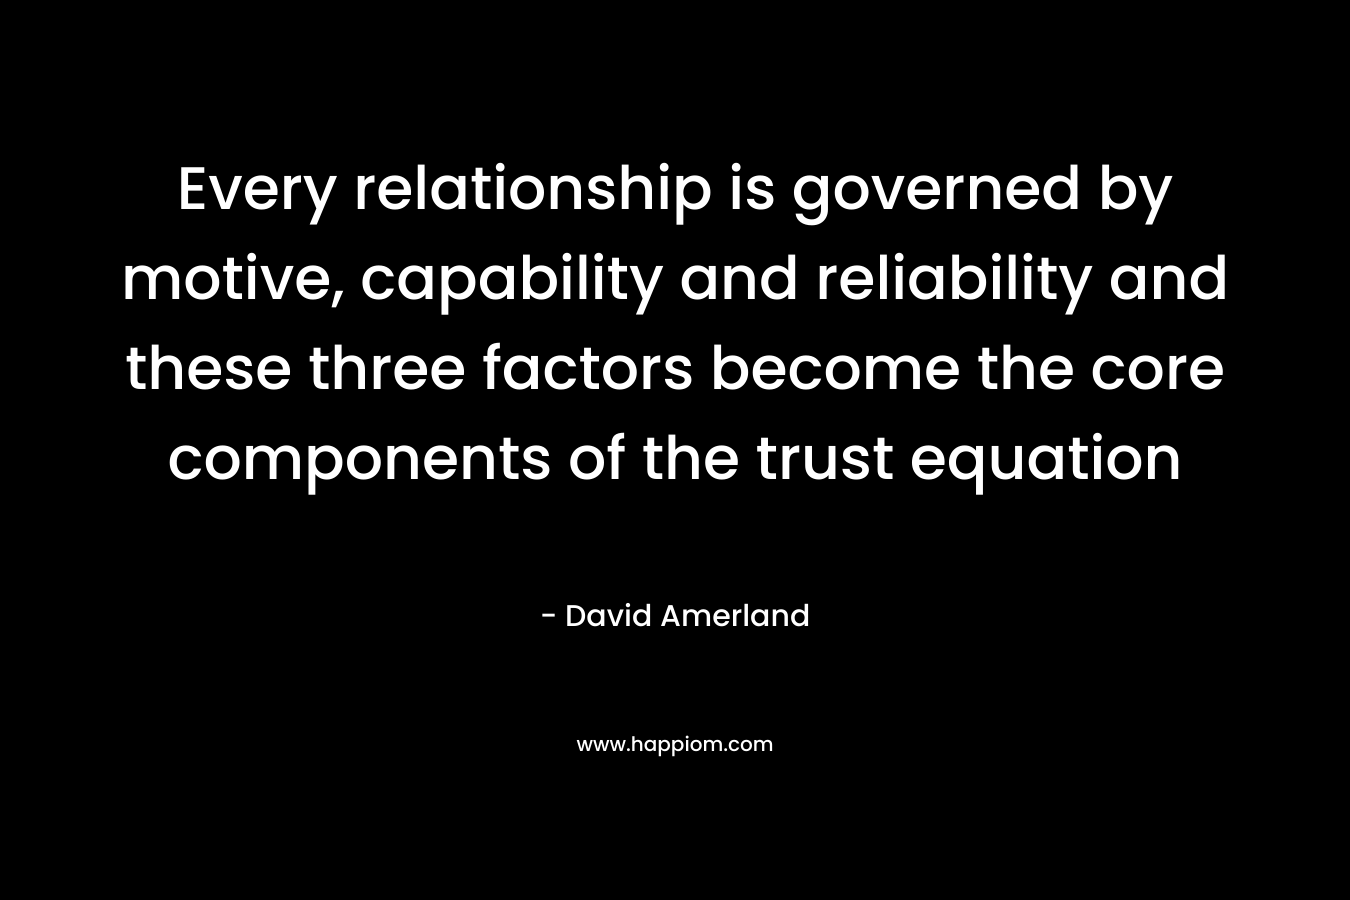 Every relationship is governed by motive, capability and reliability and these three factors become the core components of the trust equation